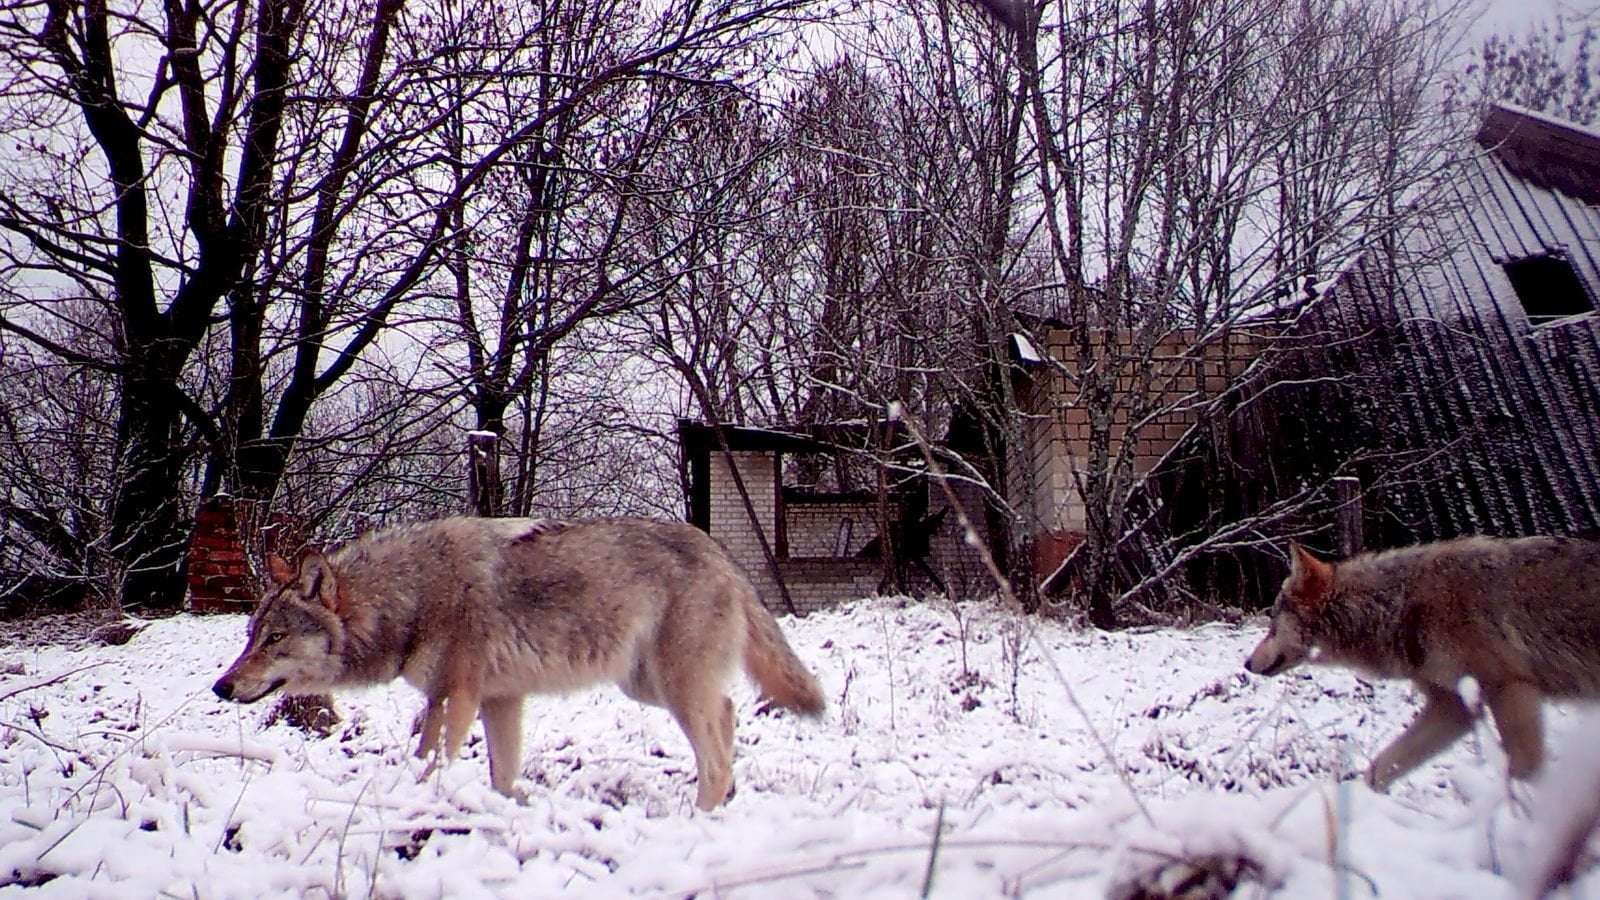 image for Chernobyl's mutant wolves appear to have developed resistance to cancer, study finds